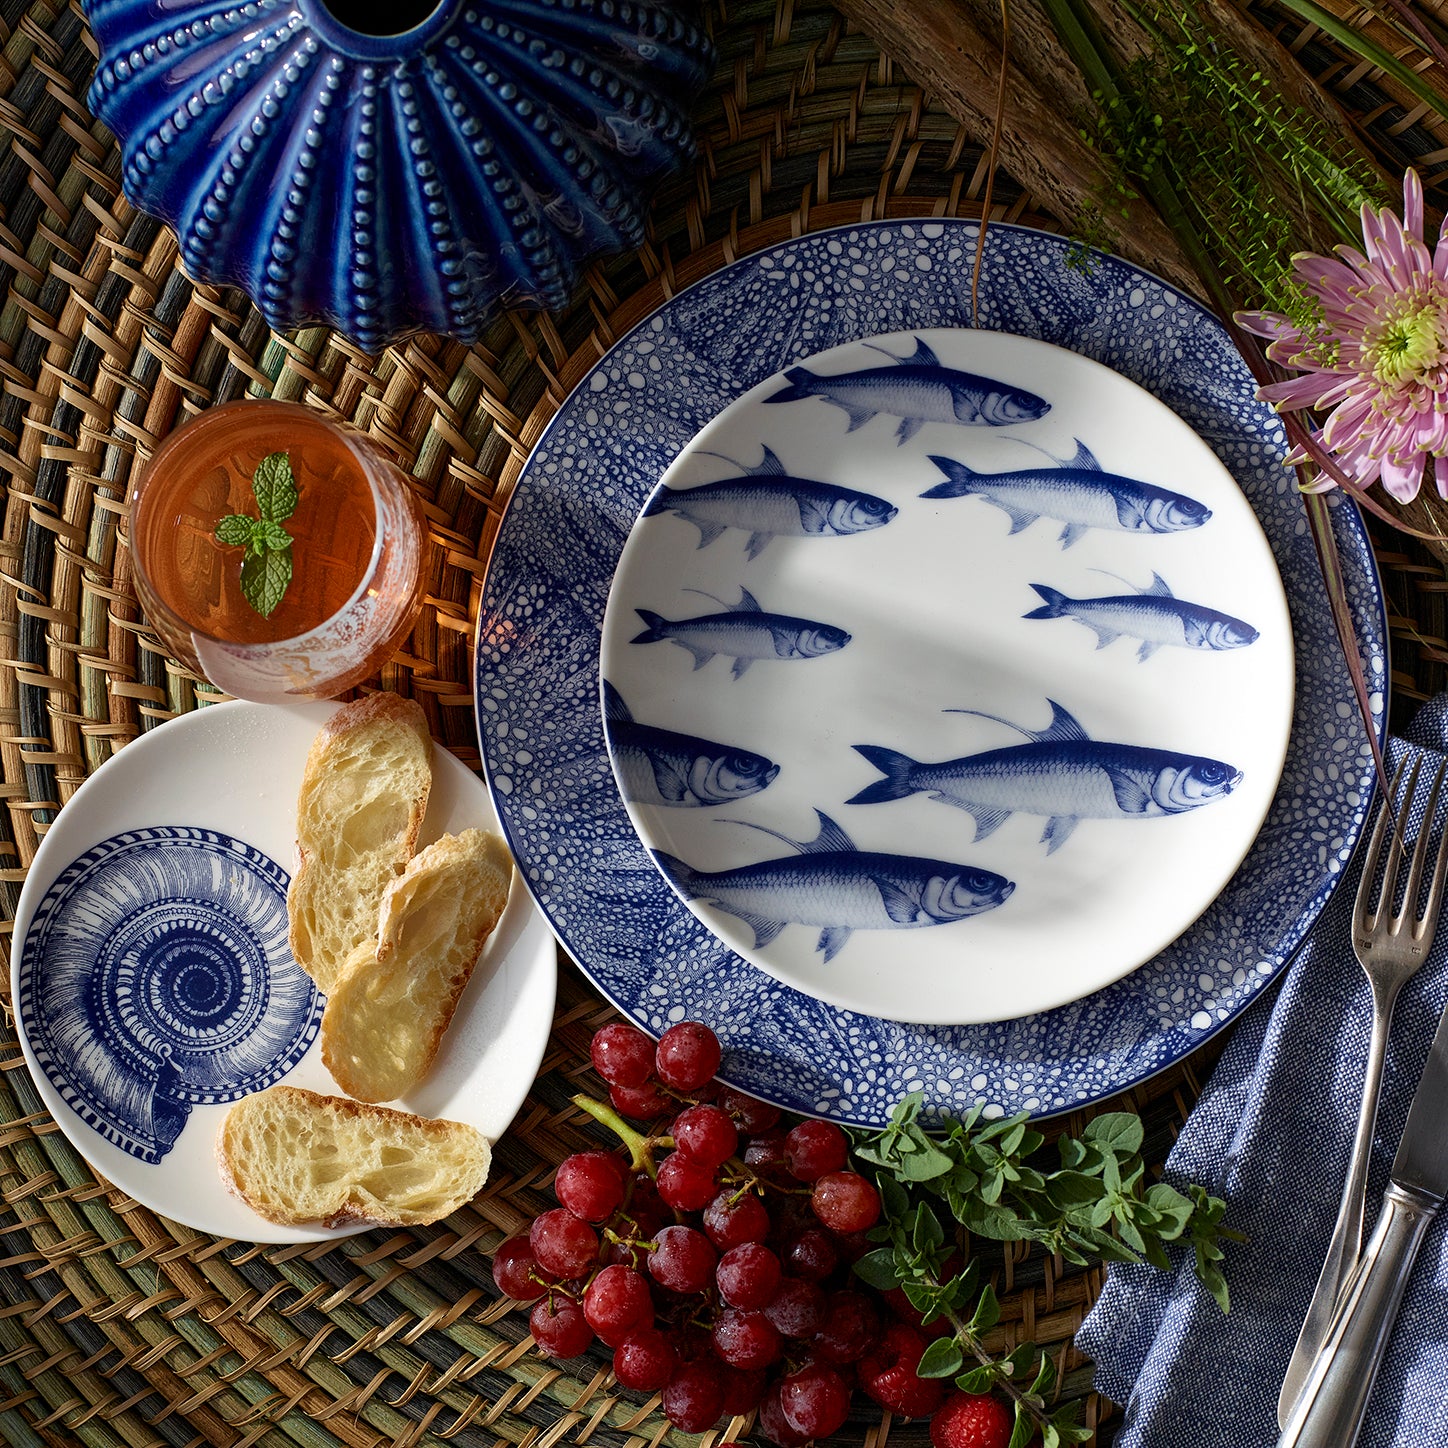 Coastal Dinnerware Collection in High-Fired Blue & White Porcelain from Caskata- shown here Shells Canape Plate, School of Fish Salad Plate, Sea Fan Dinner Plate.